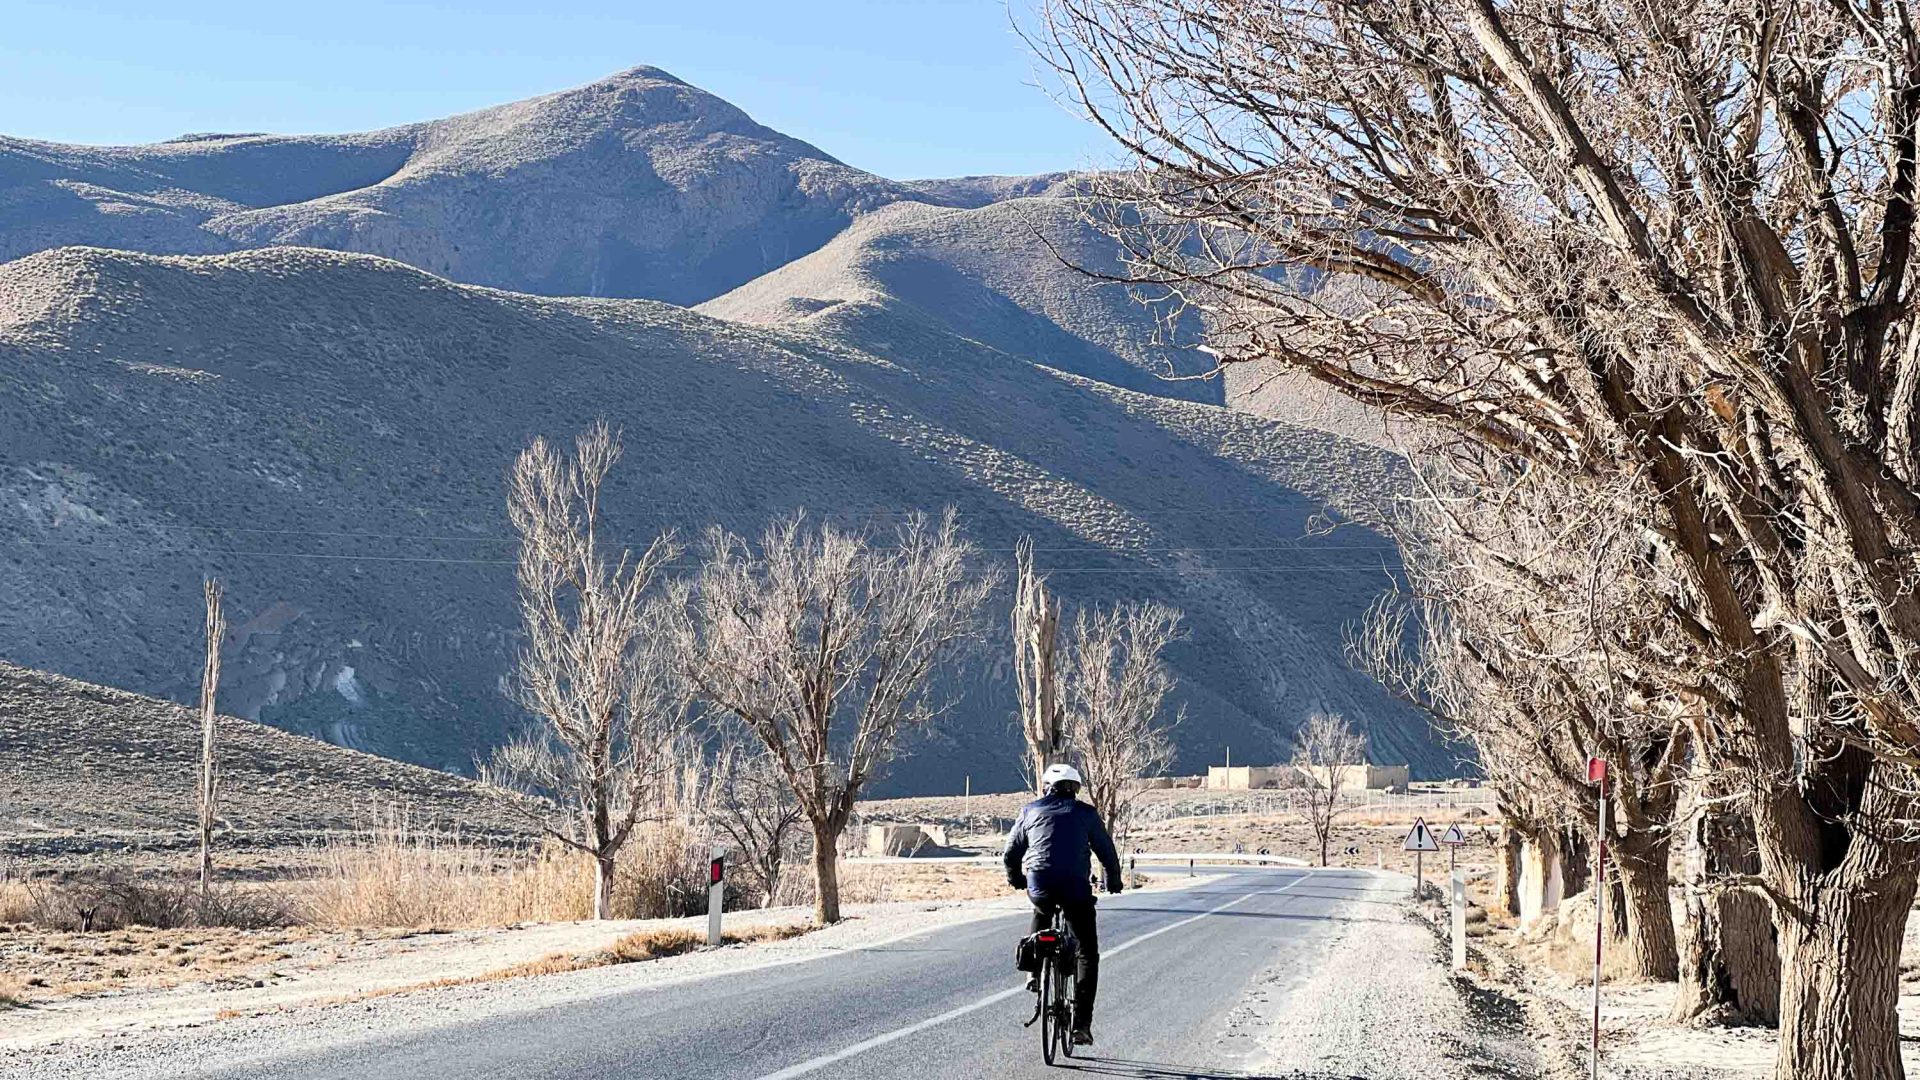 A cyclist along a mountain road in winter.